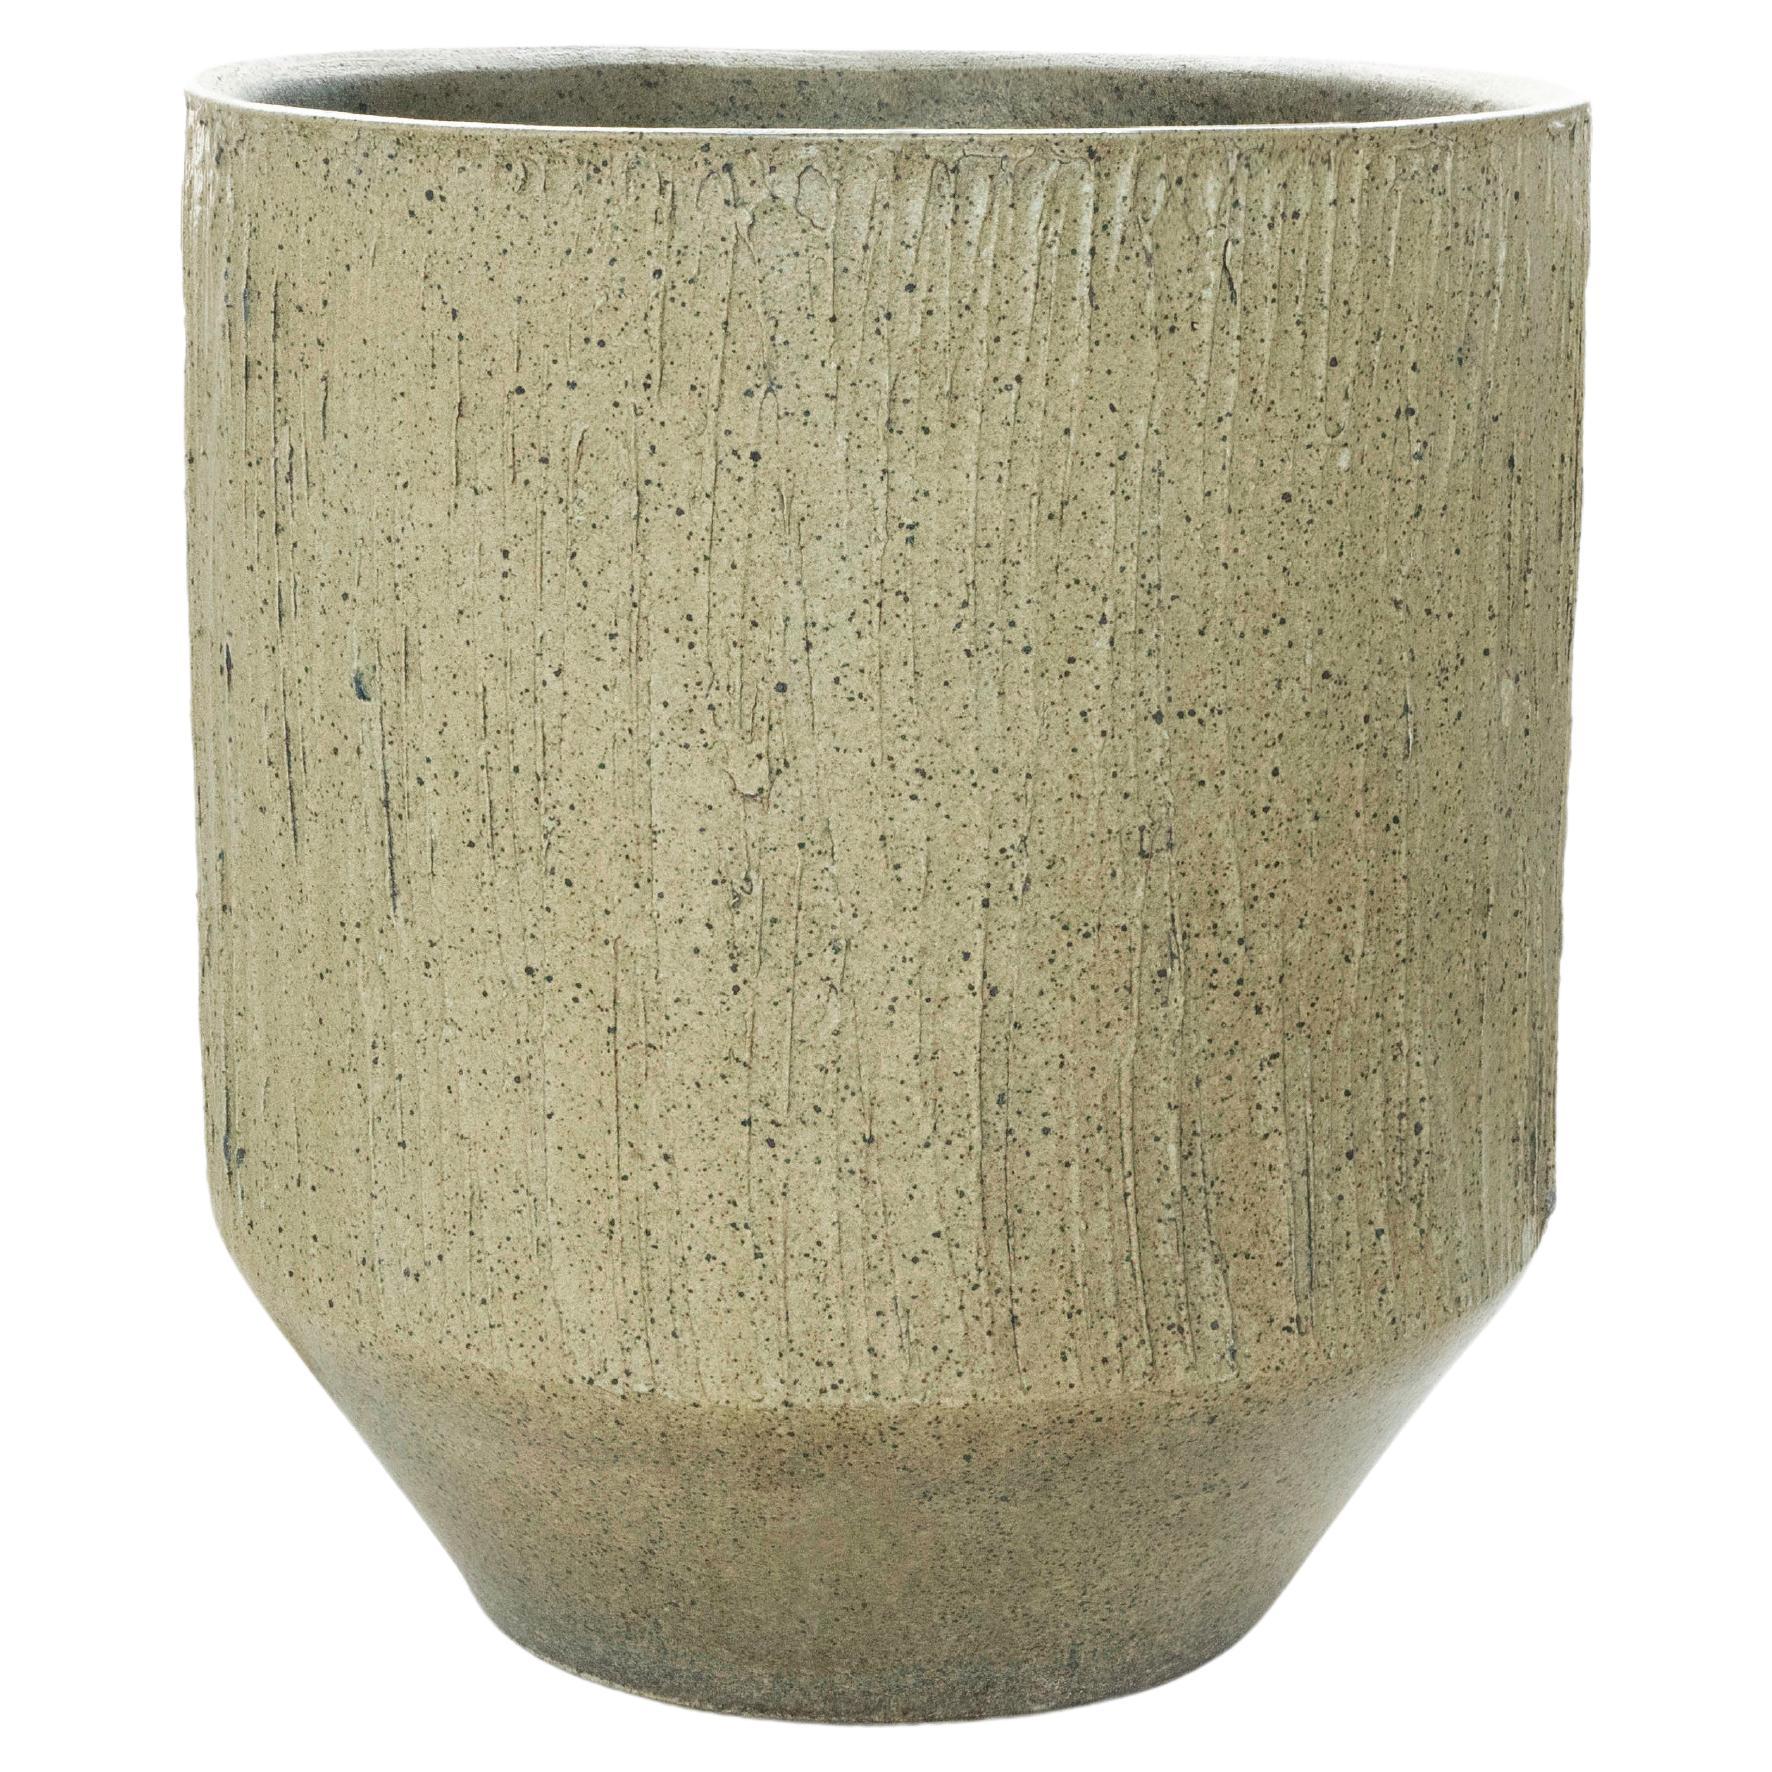 David Cressey Pro Artisan "Scratch" Planter for Architectural Pottery 1960's For Sale